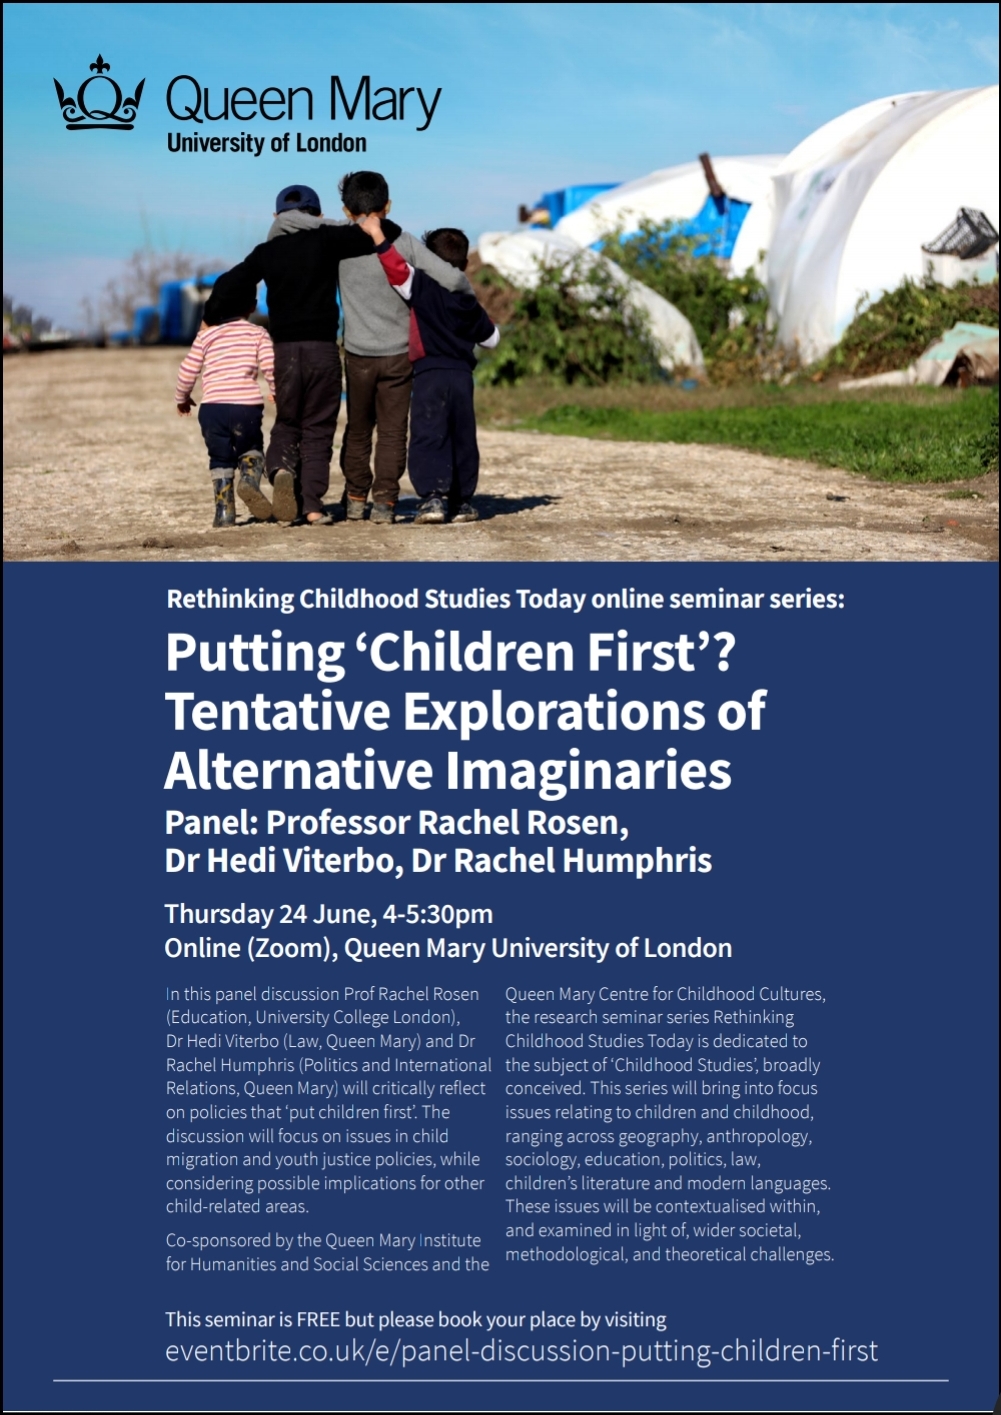 poster for rethinking childhood 3rd event with photo showing a group of children walking past encampment